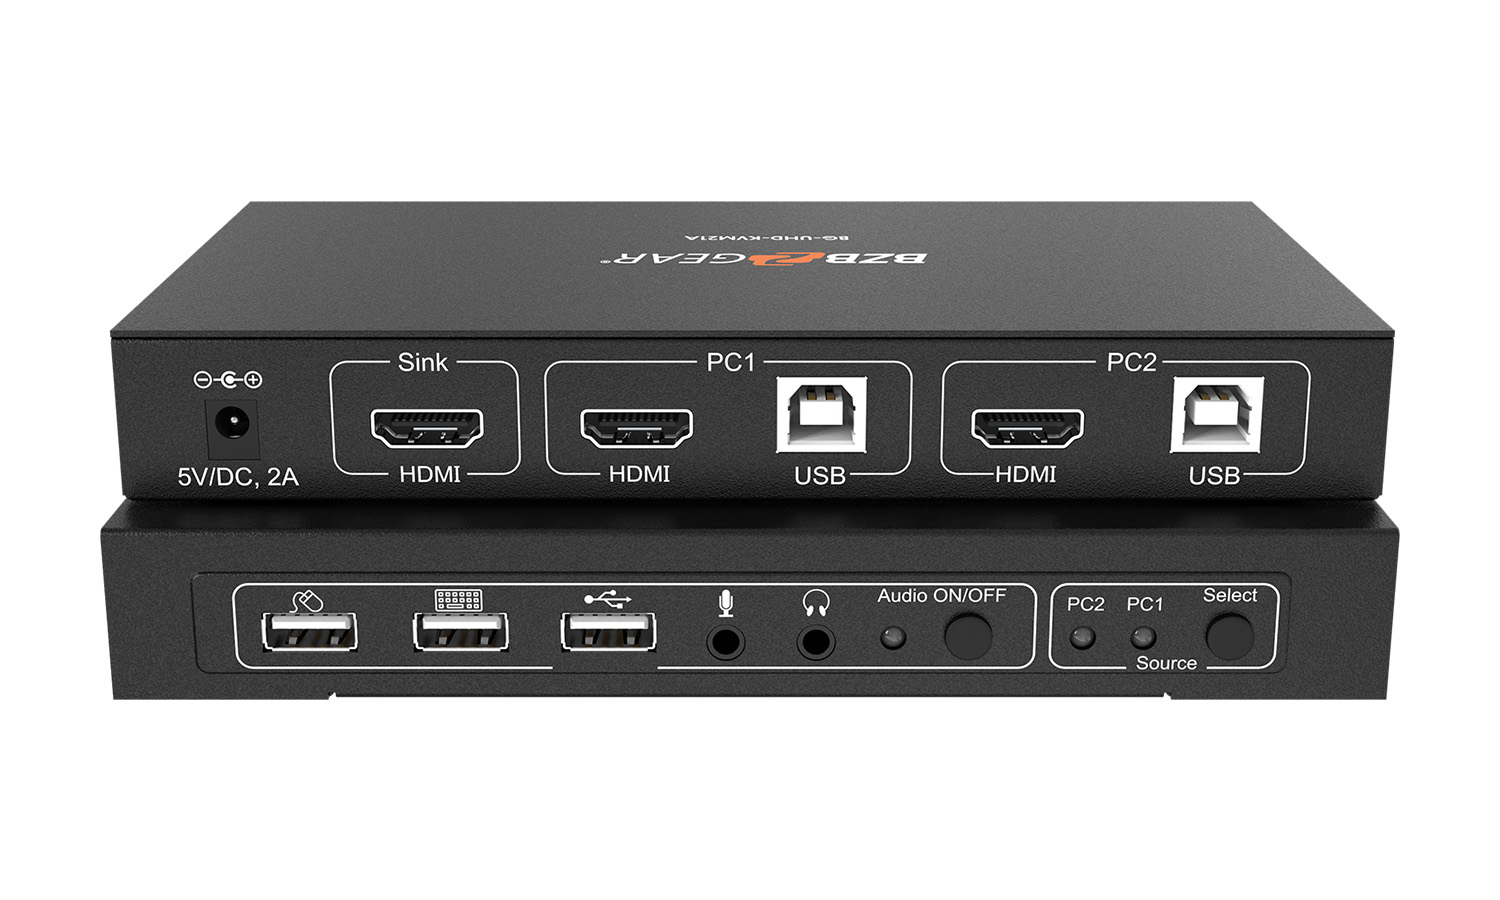 BZBGEAR BG-UHD-KVM21A 2x1 4K UHD KVM Switcher with USB2.0 Ports for Peripherals and Audio Support